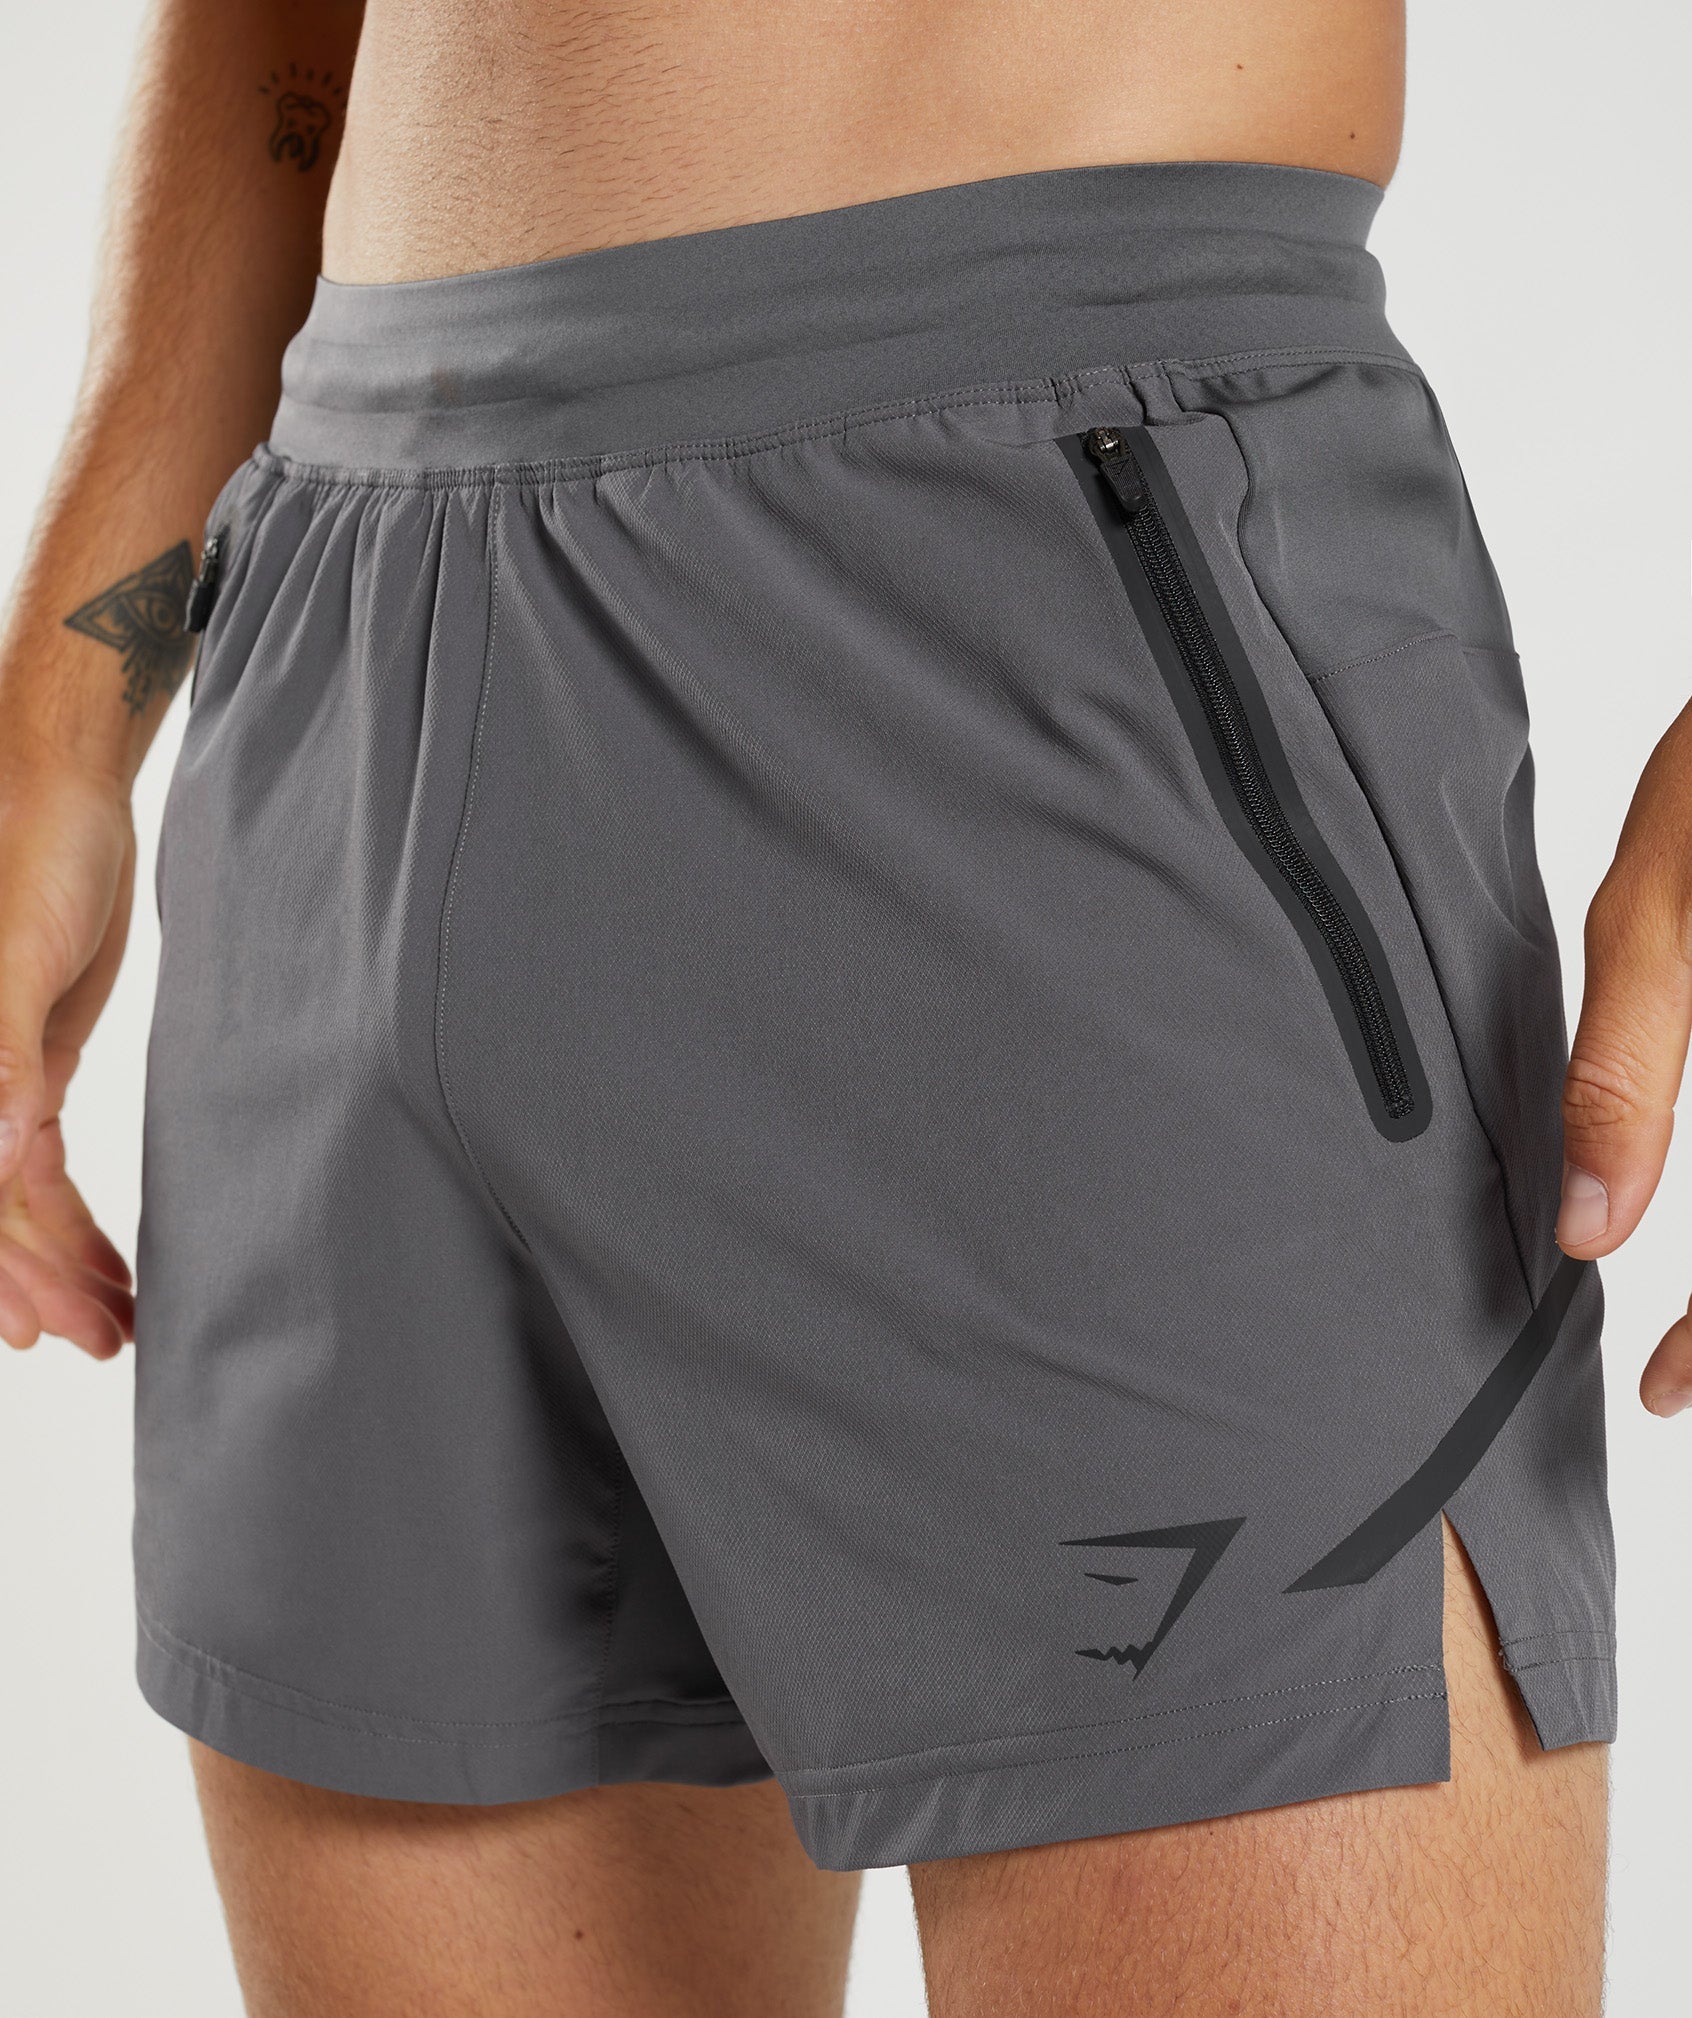 Apex 5" Perform Shorts in Silhouette Grey - view 6